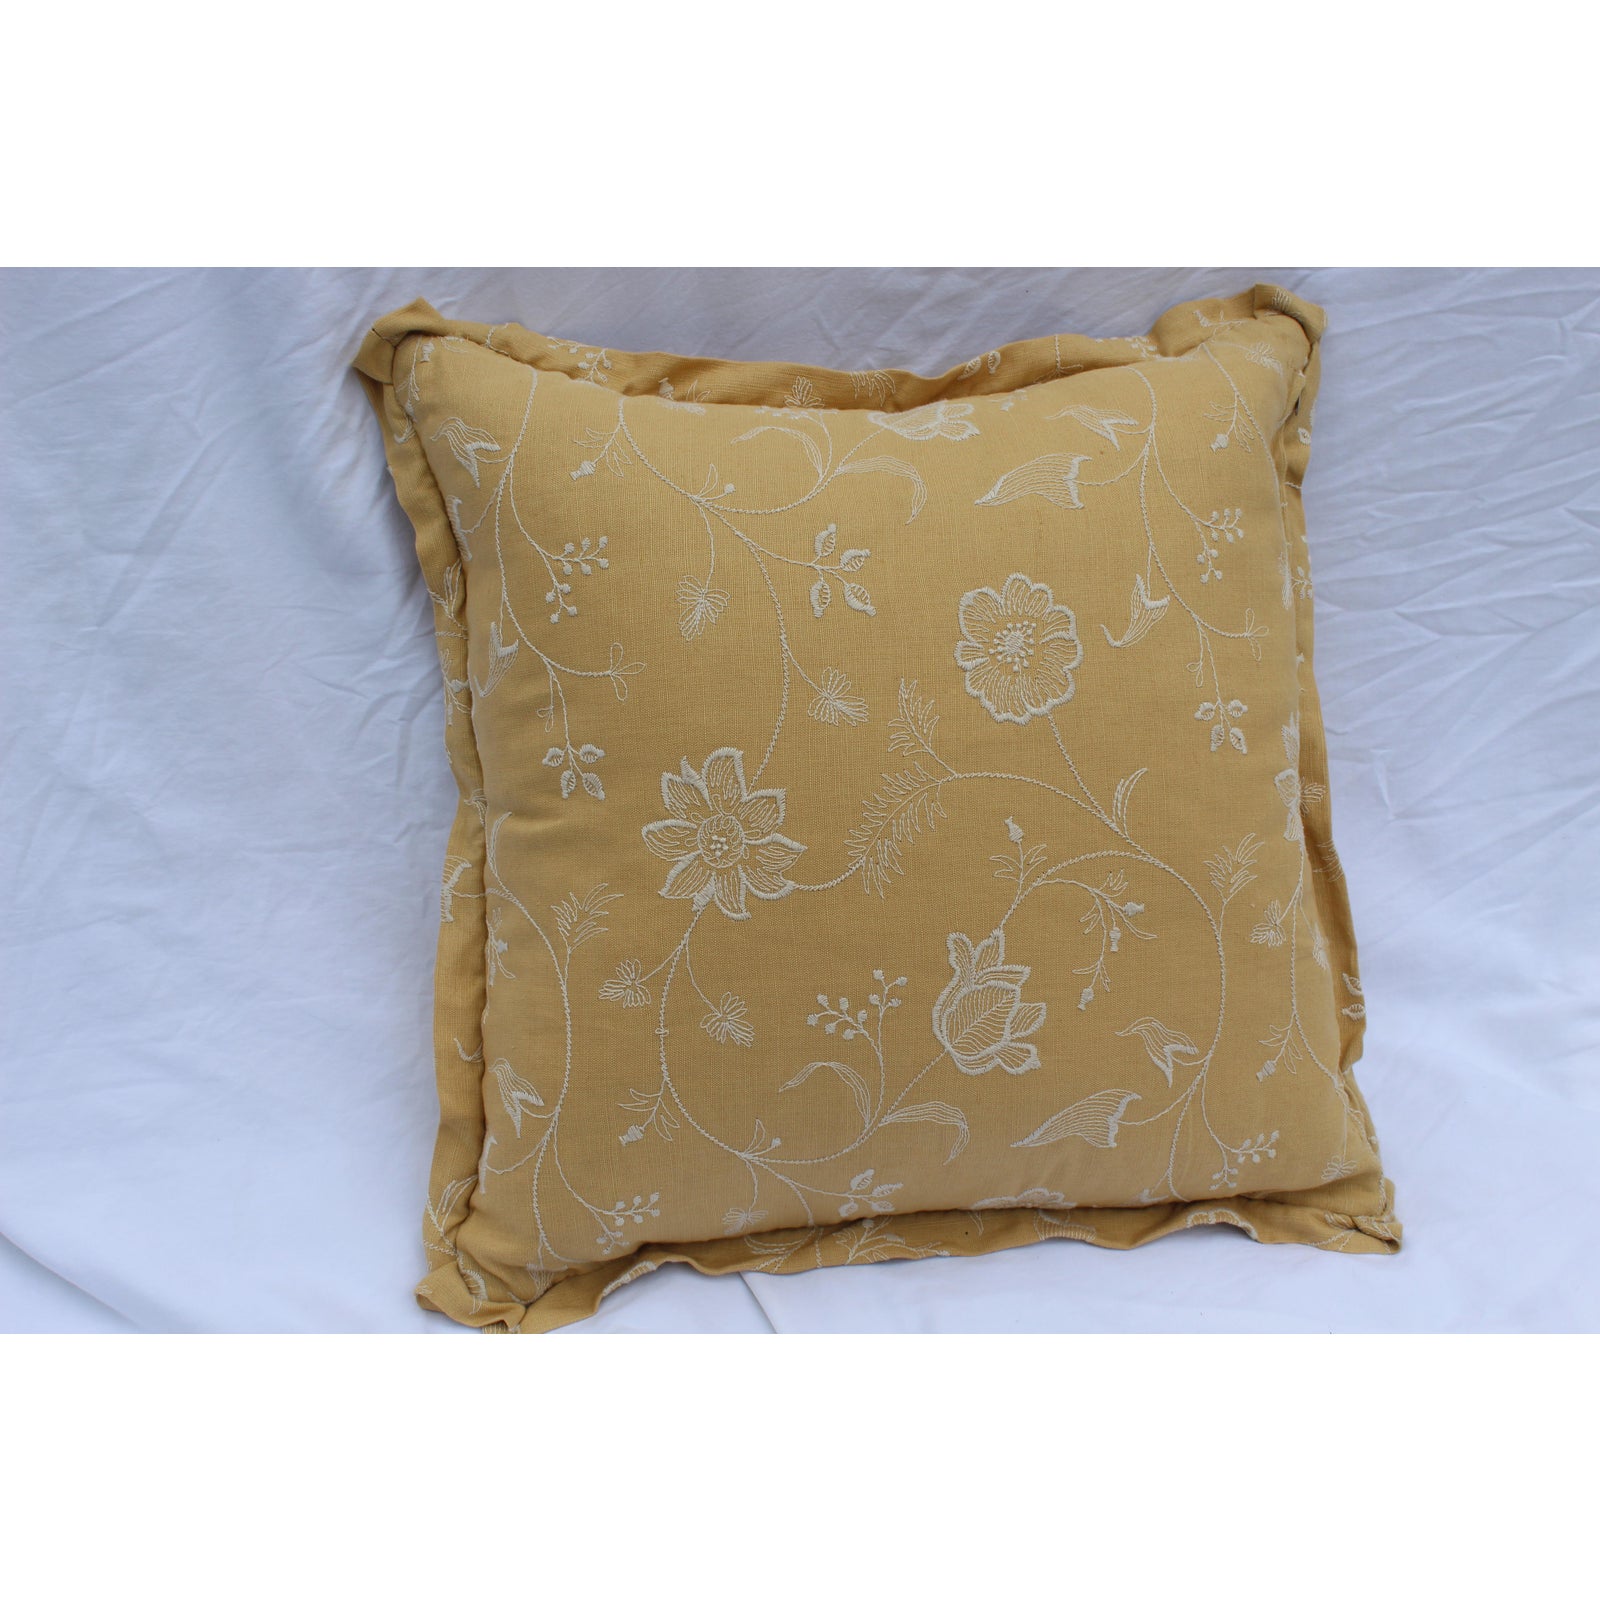 1960s-mid-century-modern-mustard-yellow-down-pillow-with-white-floral-embroidery-7606